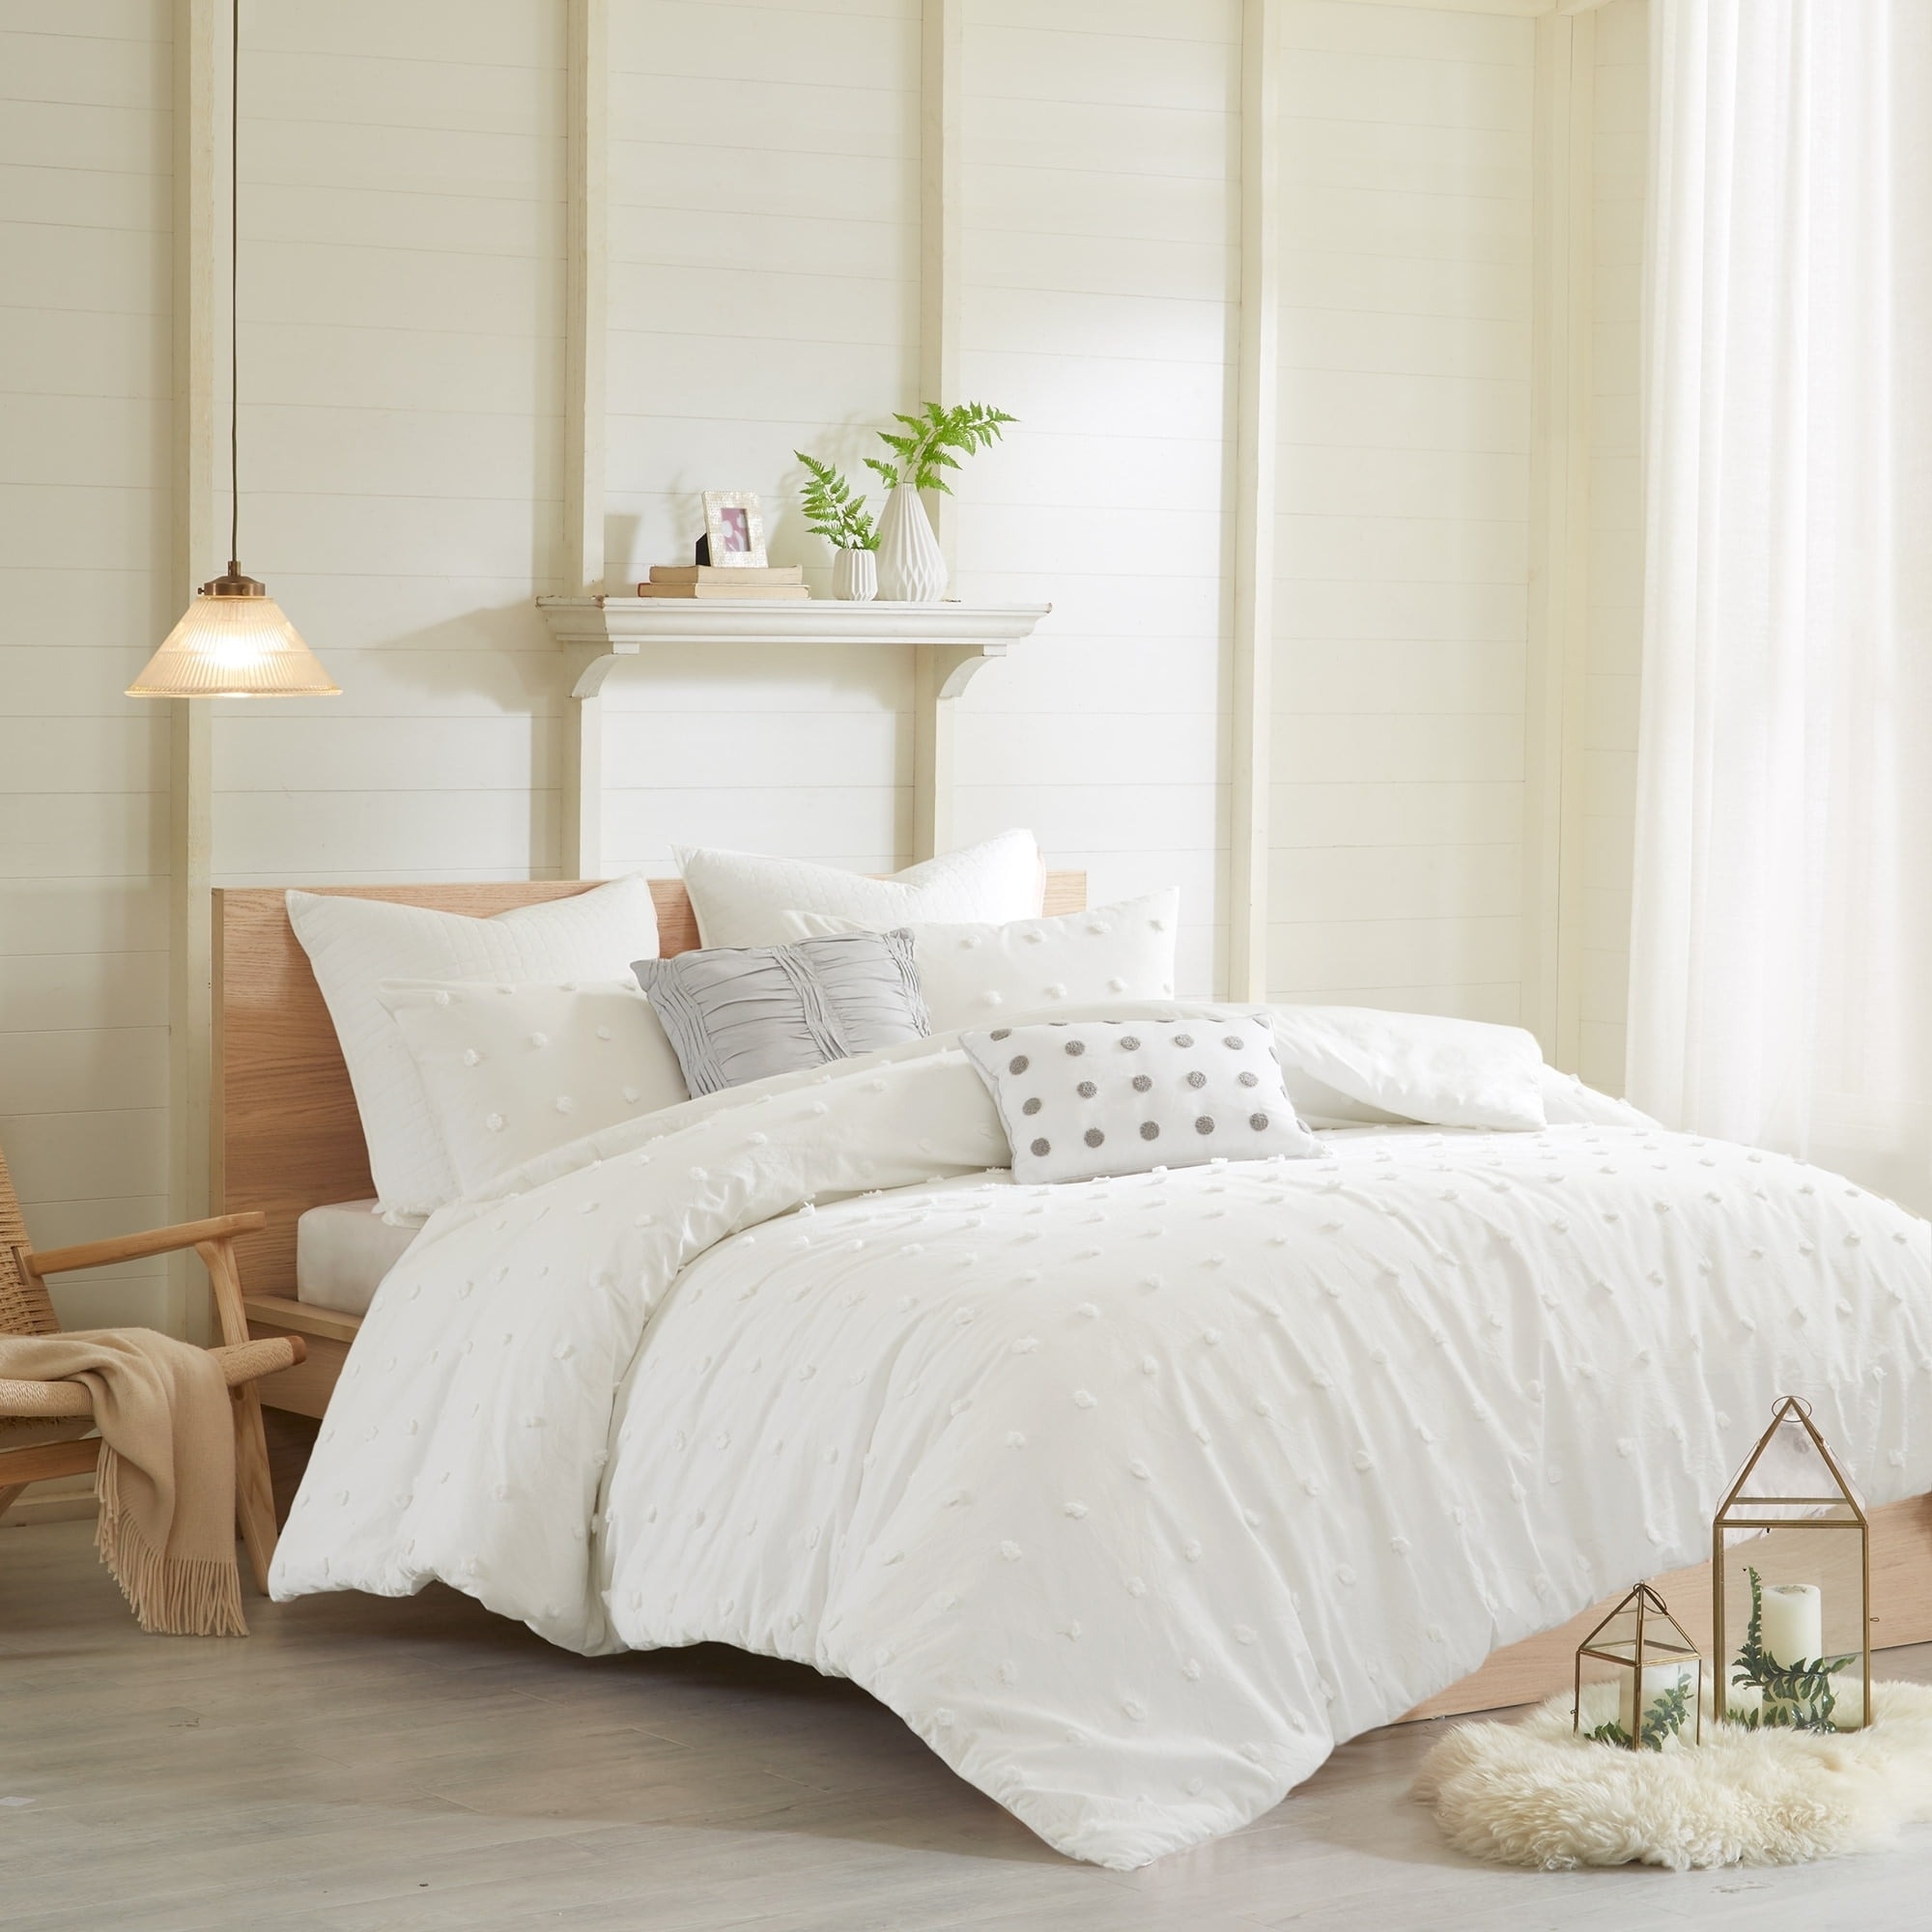 white fluffy bedding set on a bed